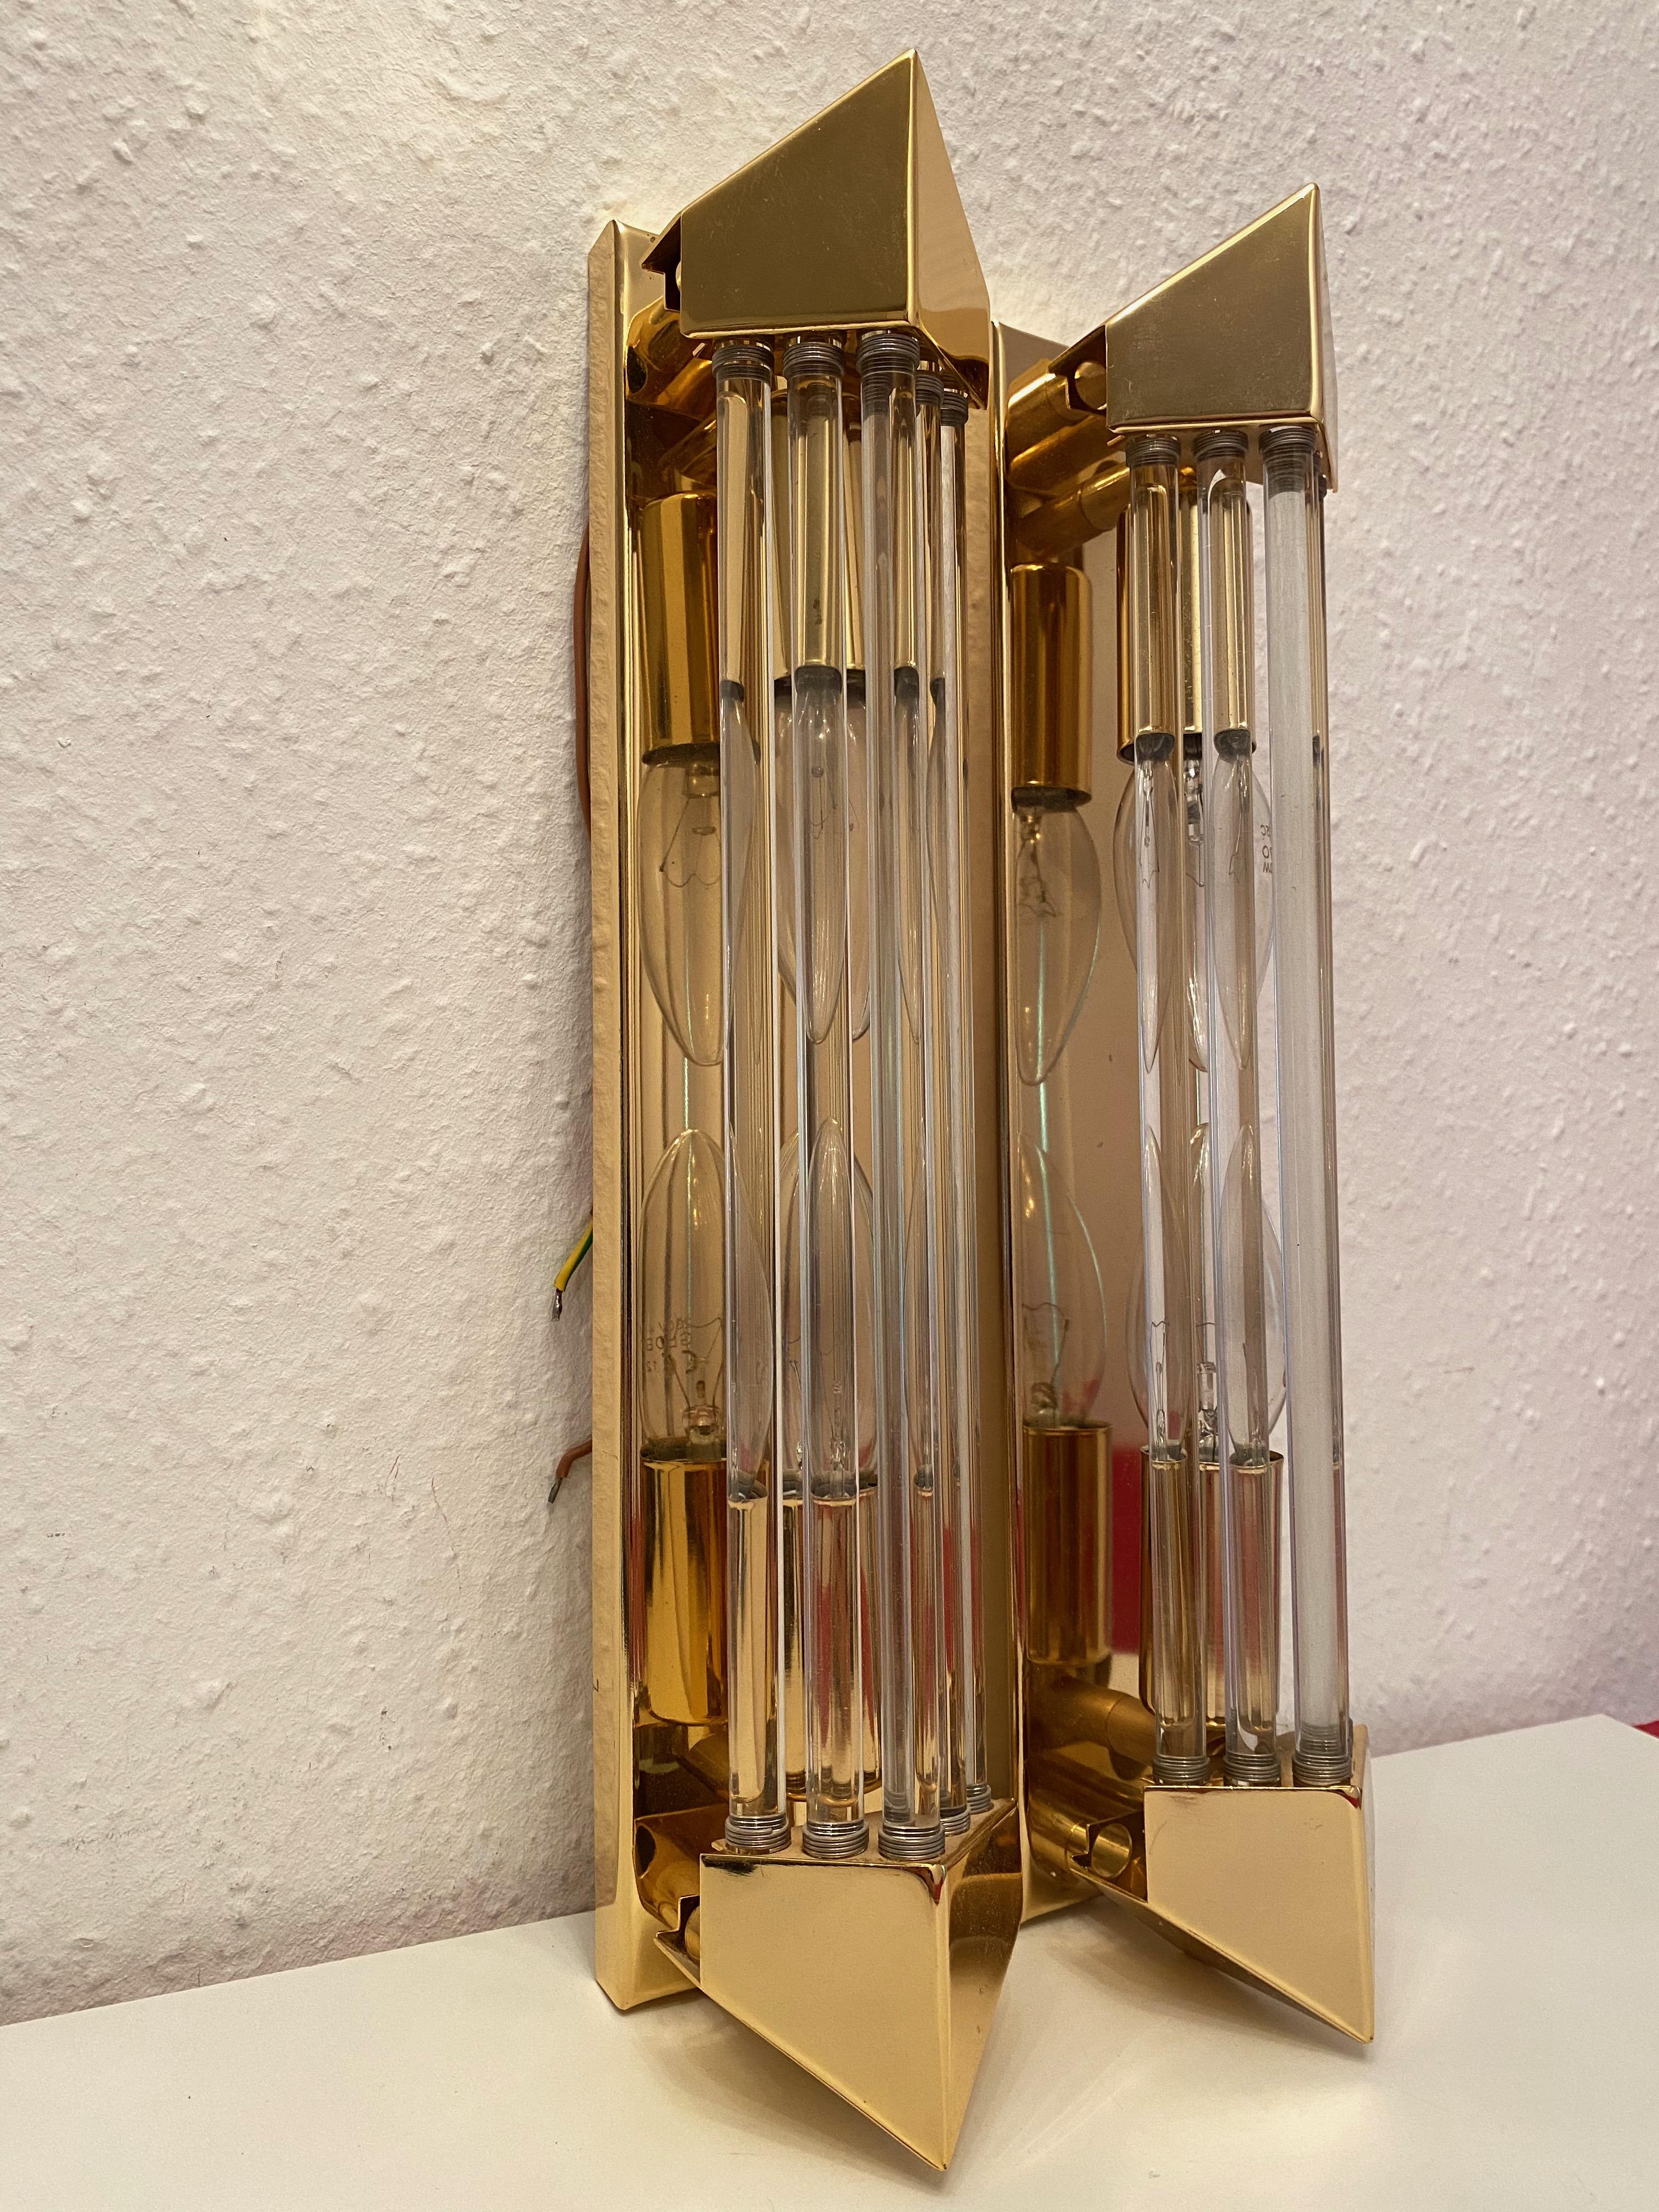 Late 20th Century Pair of Brass and Glass Rod Wall Sconces Art Deco Style, Honsel, Germany